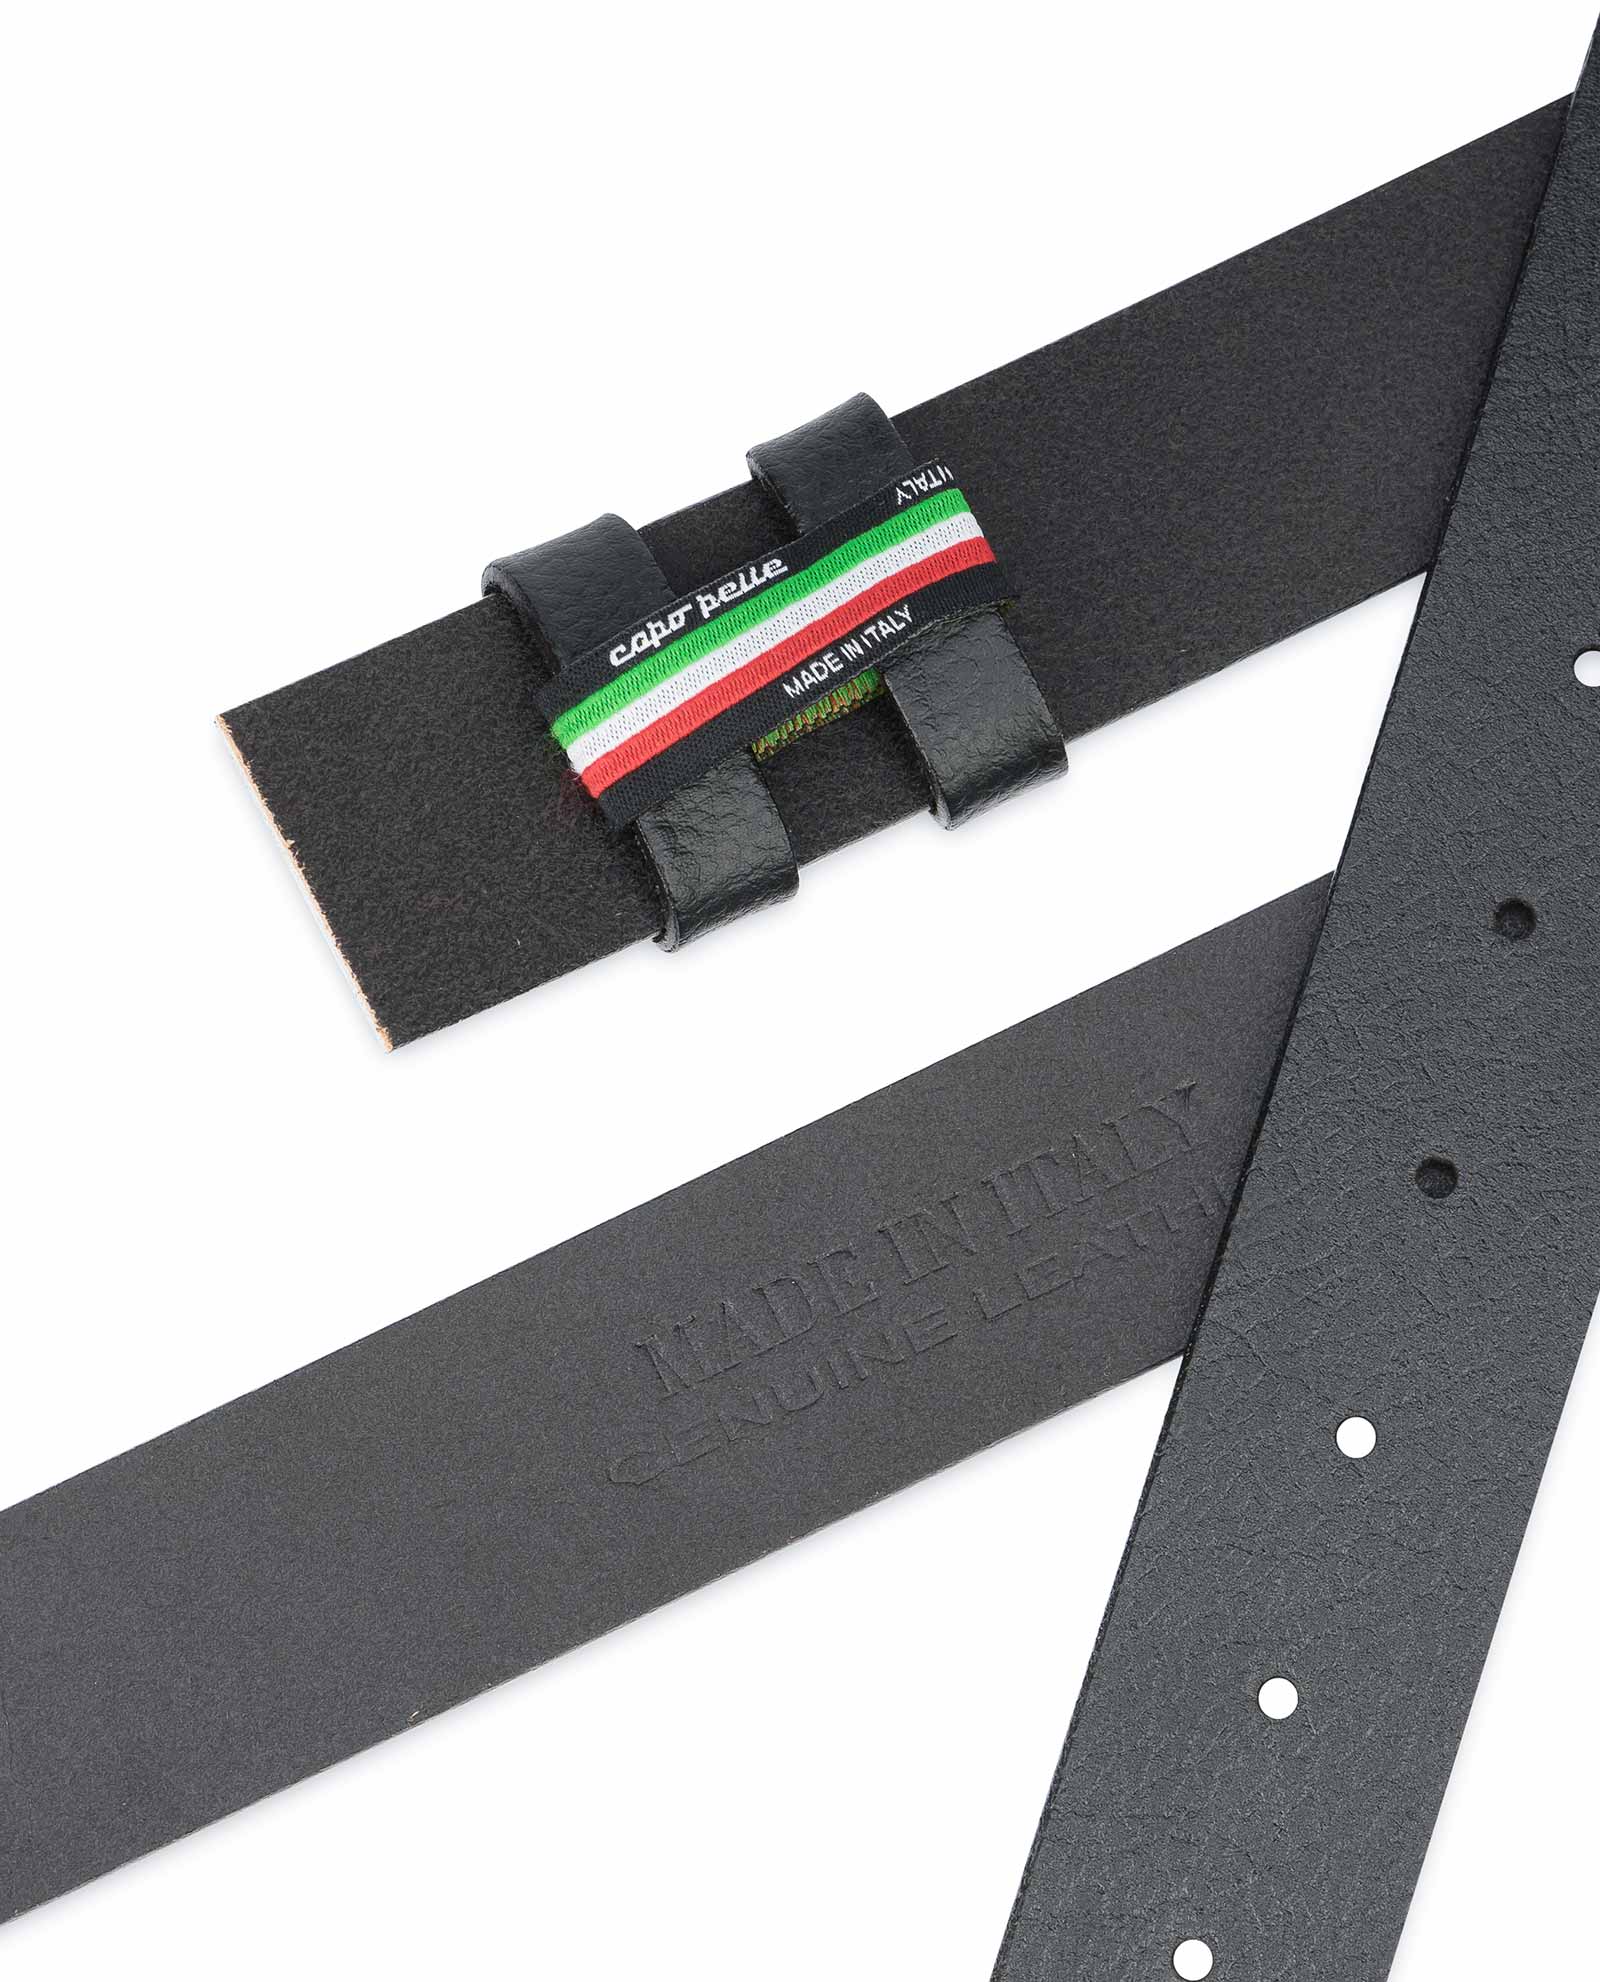 160502 Reversible Belt Strap Without Buckle Replacement Genuine